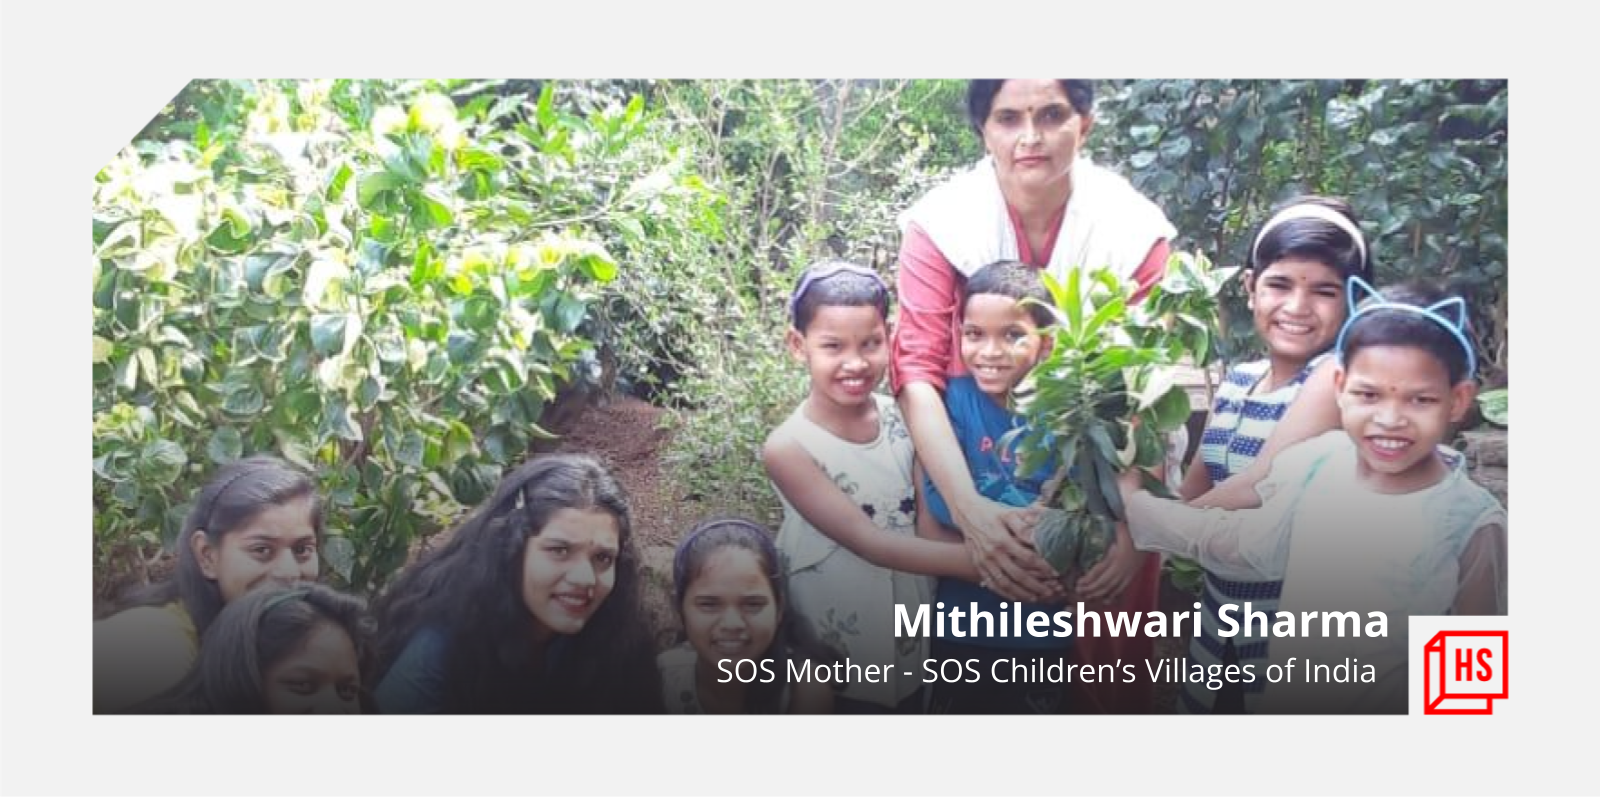 [Mother’s Day] These mothers from SOS Children’s Villages of India are raising a generation of children as their own